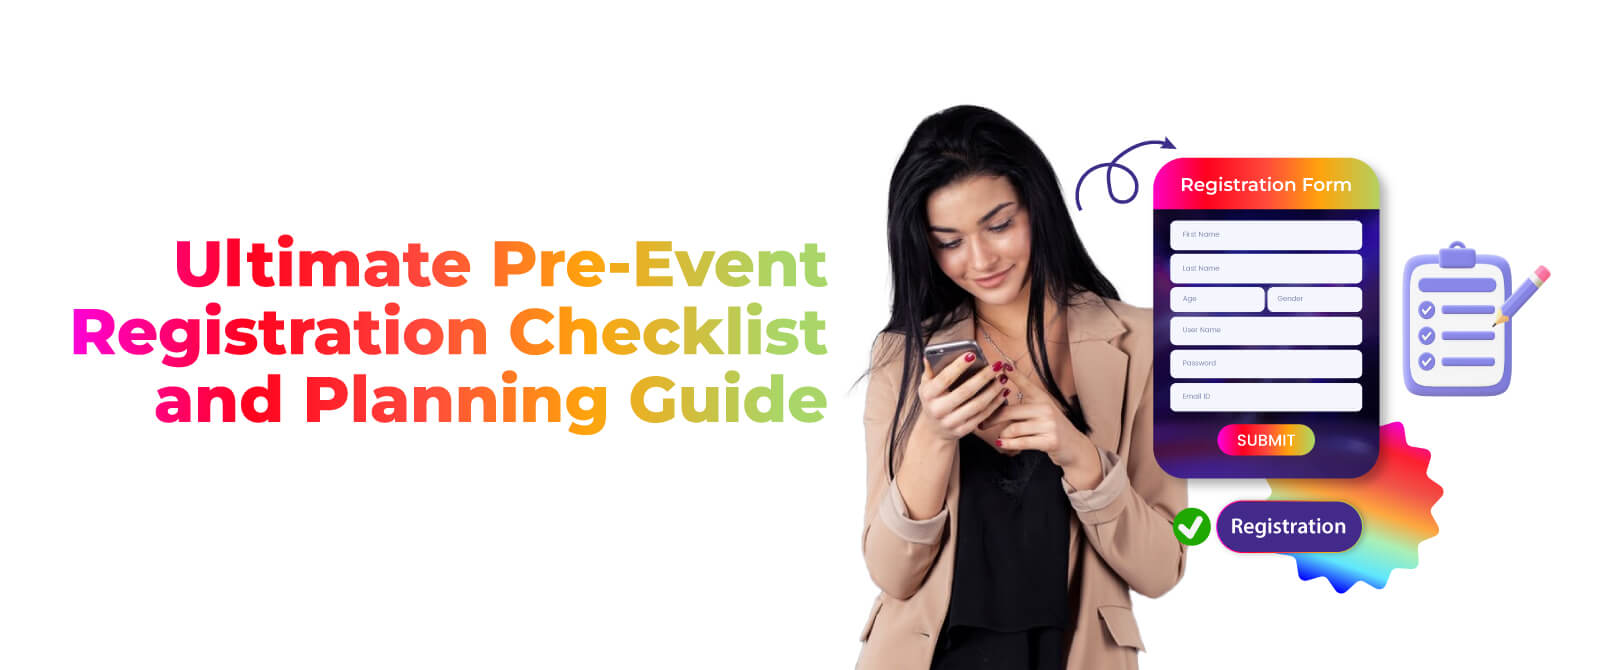 Ultimate Pre-Event Registration Checklist and Planning Guide